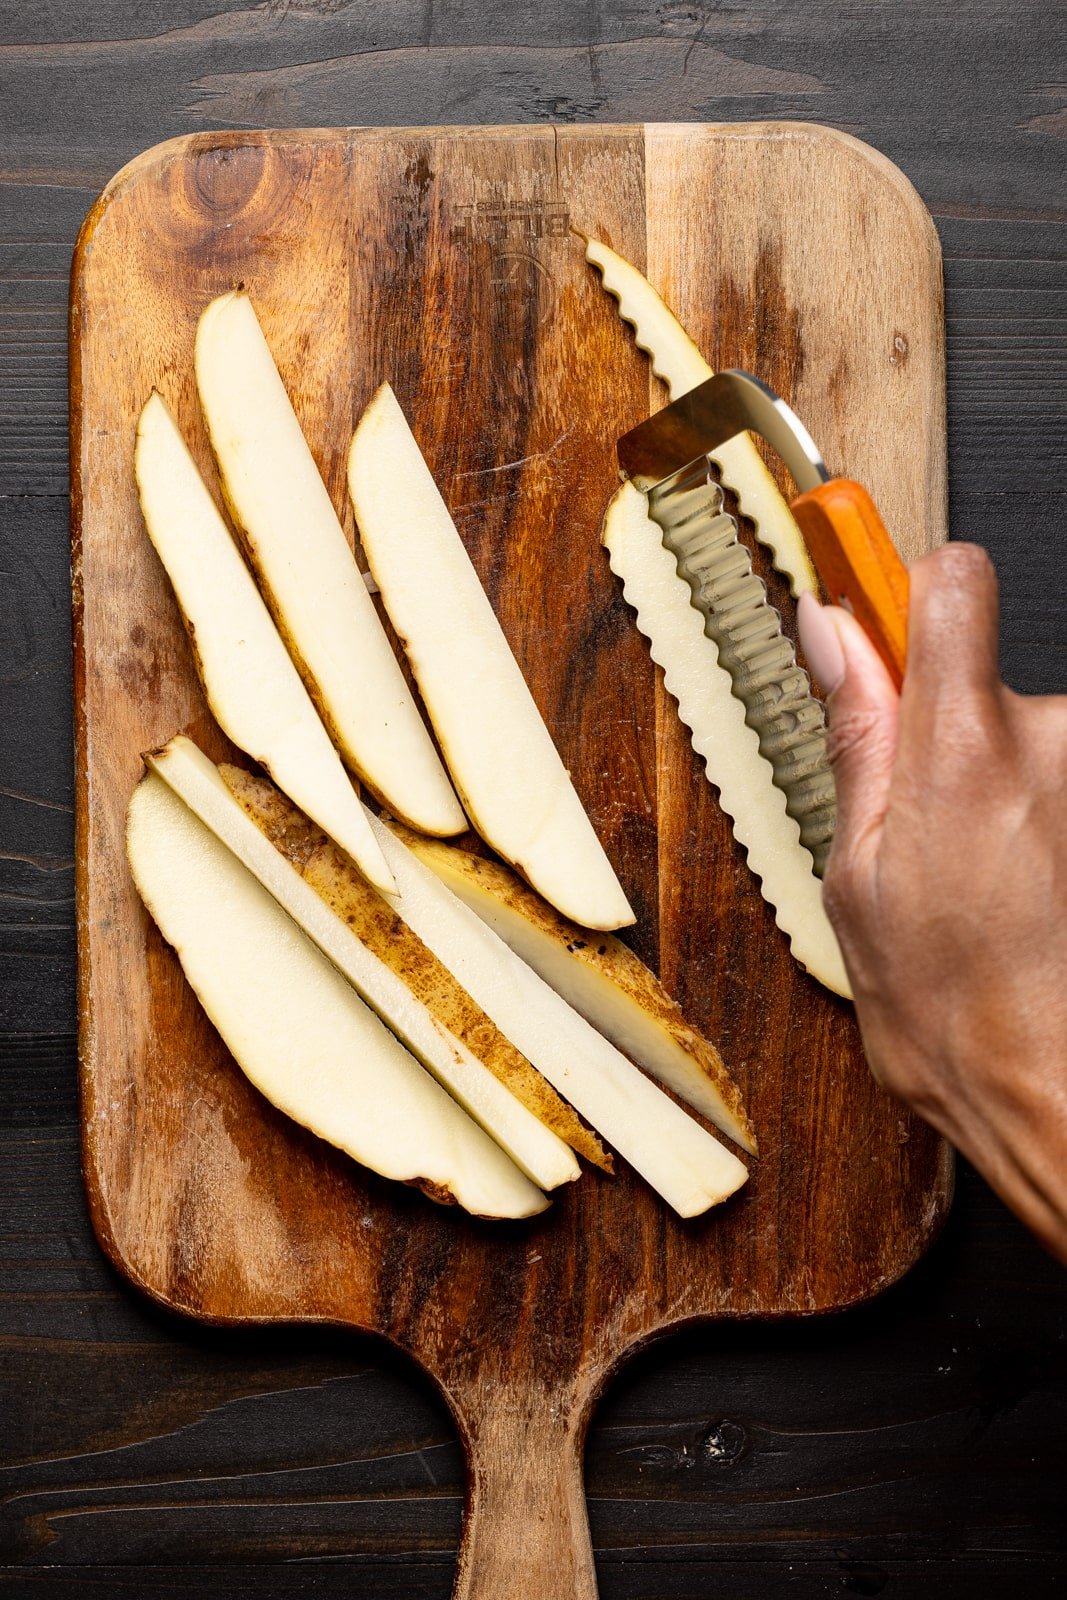 Russet potatoes being cut with crinkle cutter tool on a cutting board on black wood table.